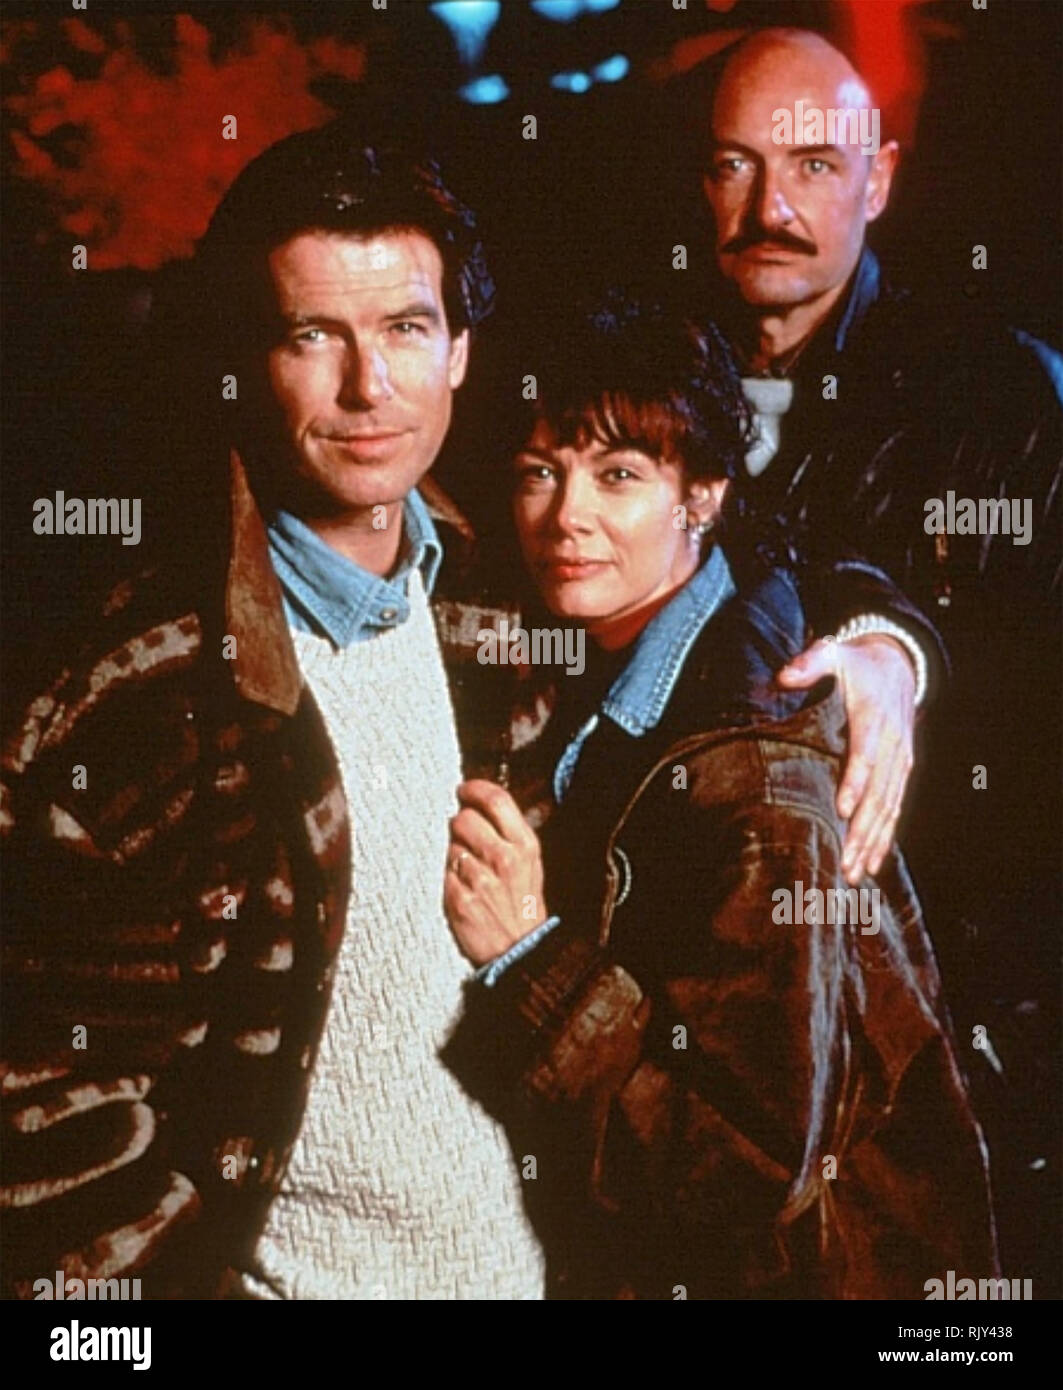 DON'T TALK TO STRANGERS 1994 MTE film with from left: Pierce Brosnan, Shanna Reed, Terry O'Quinn Stock Photo